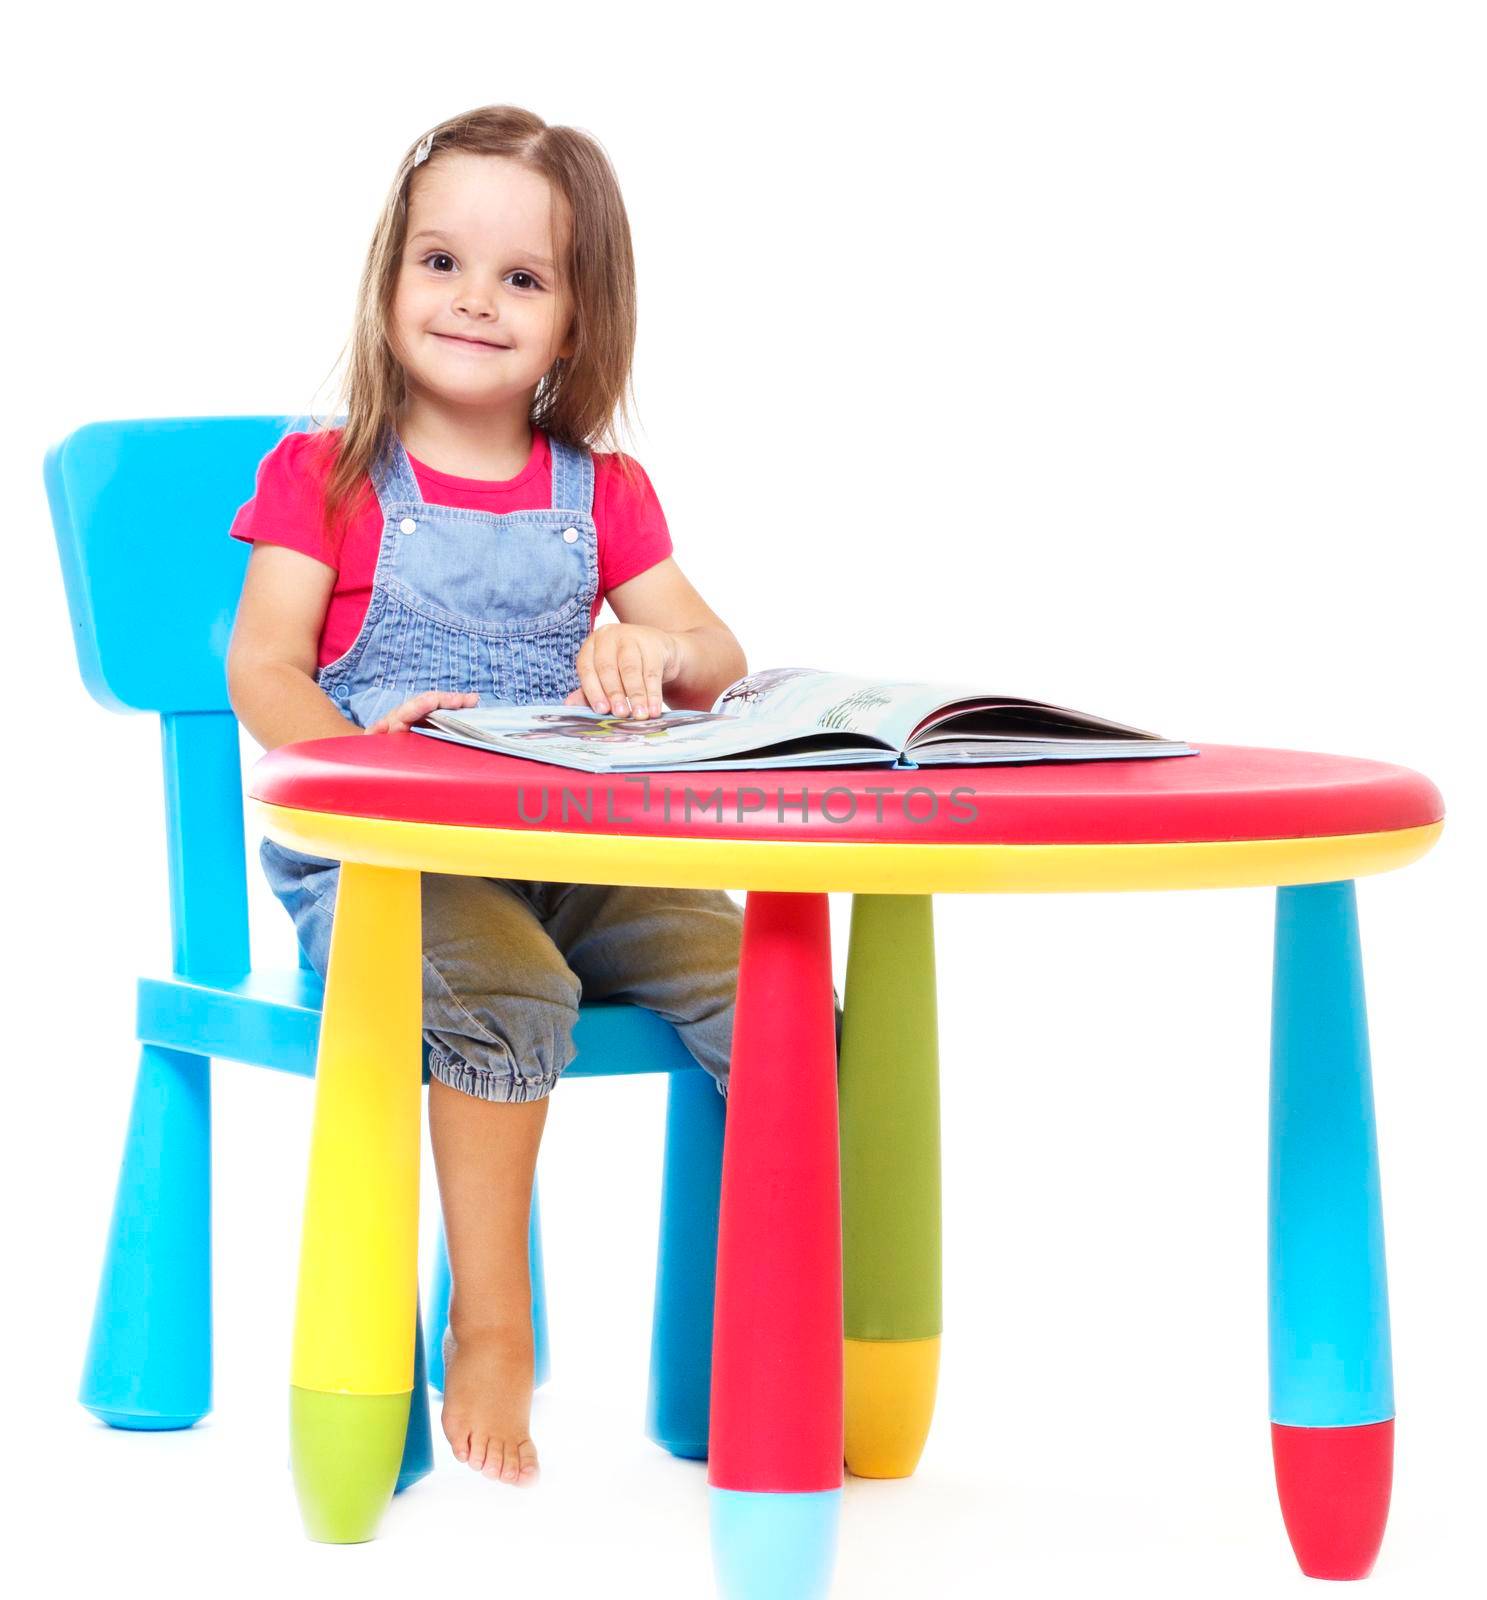 three years old girl child sitting at the table and reading a book, isolated on white